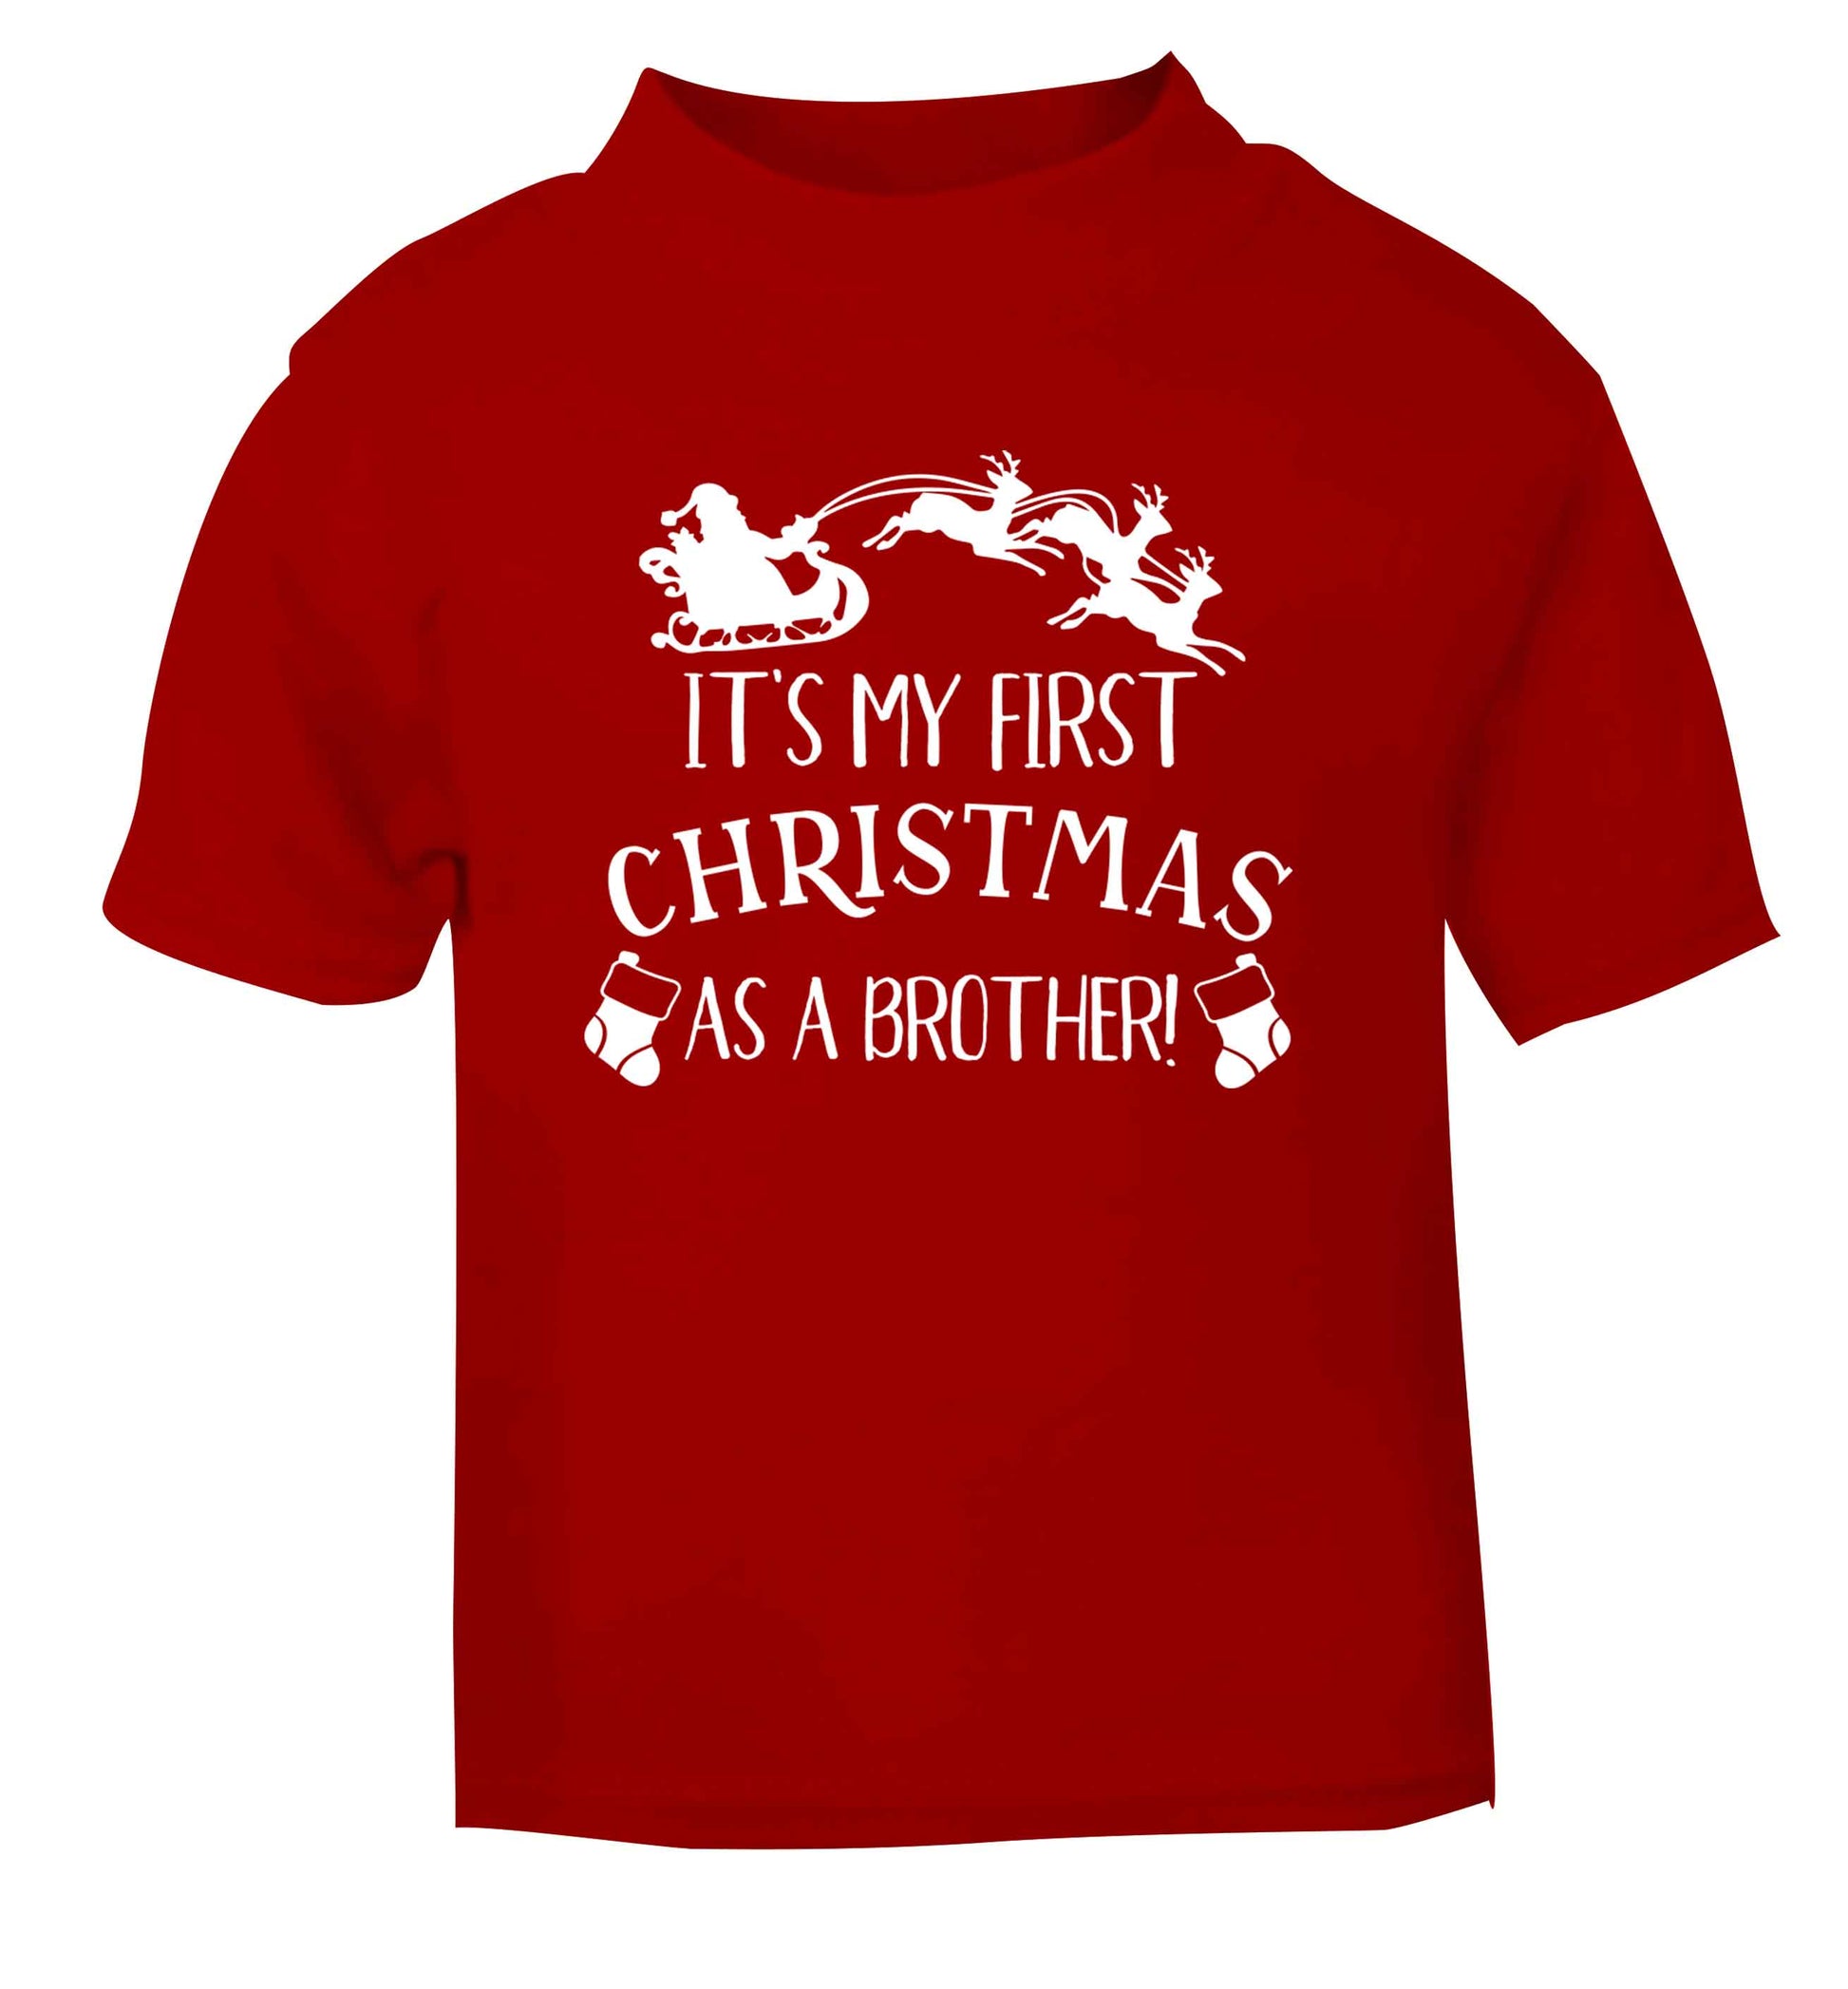 It's my first Christmas as a brother! red Baby Toddler Tshirt 2 Years